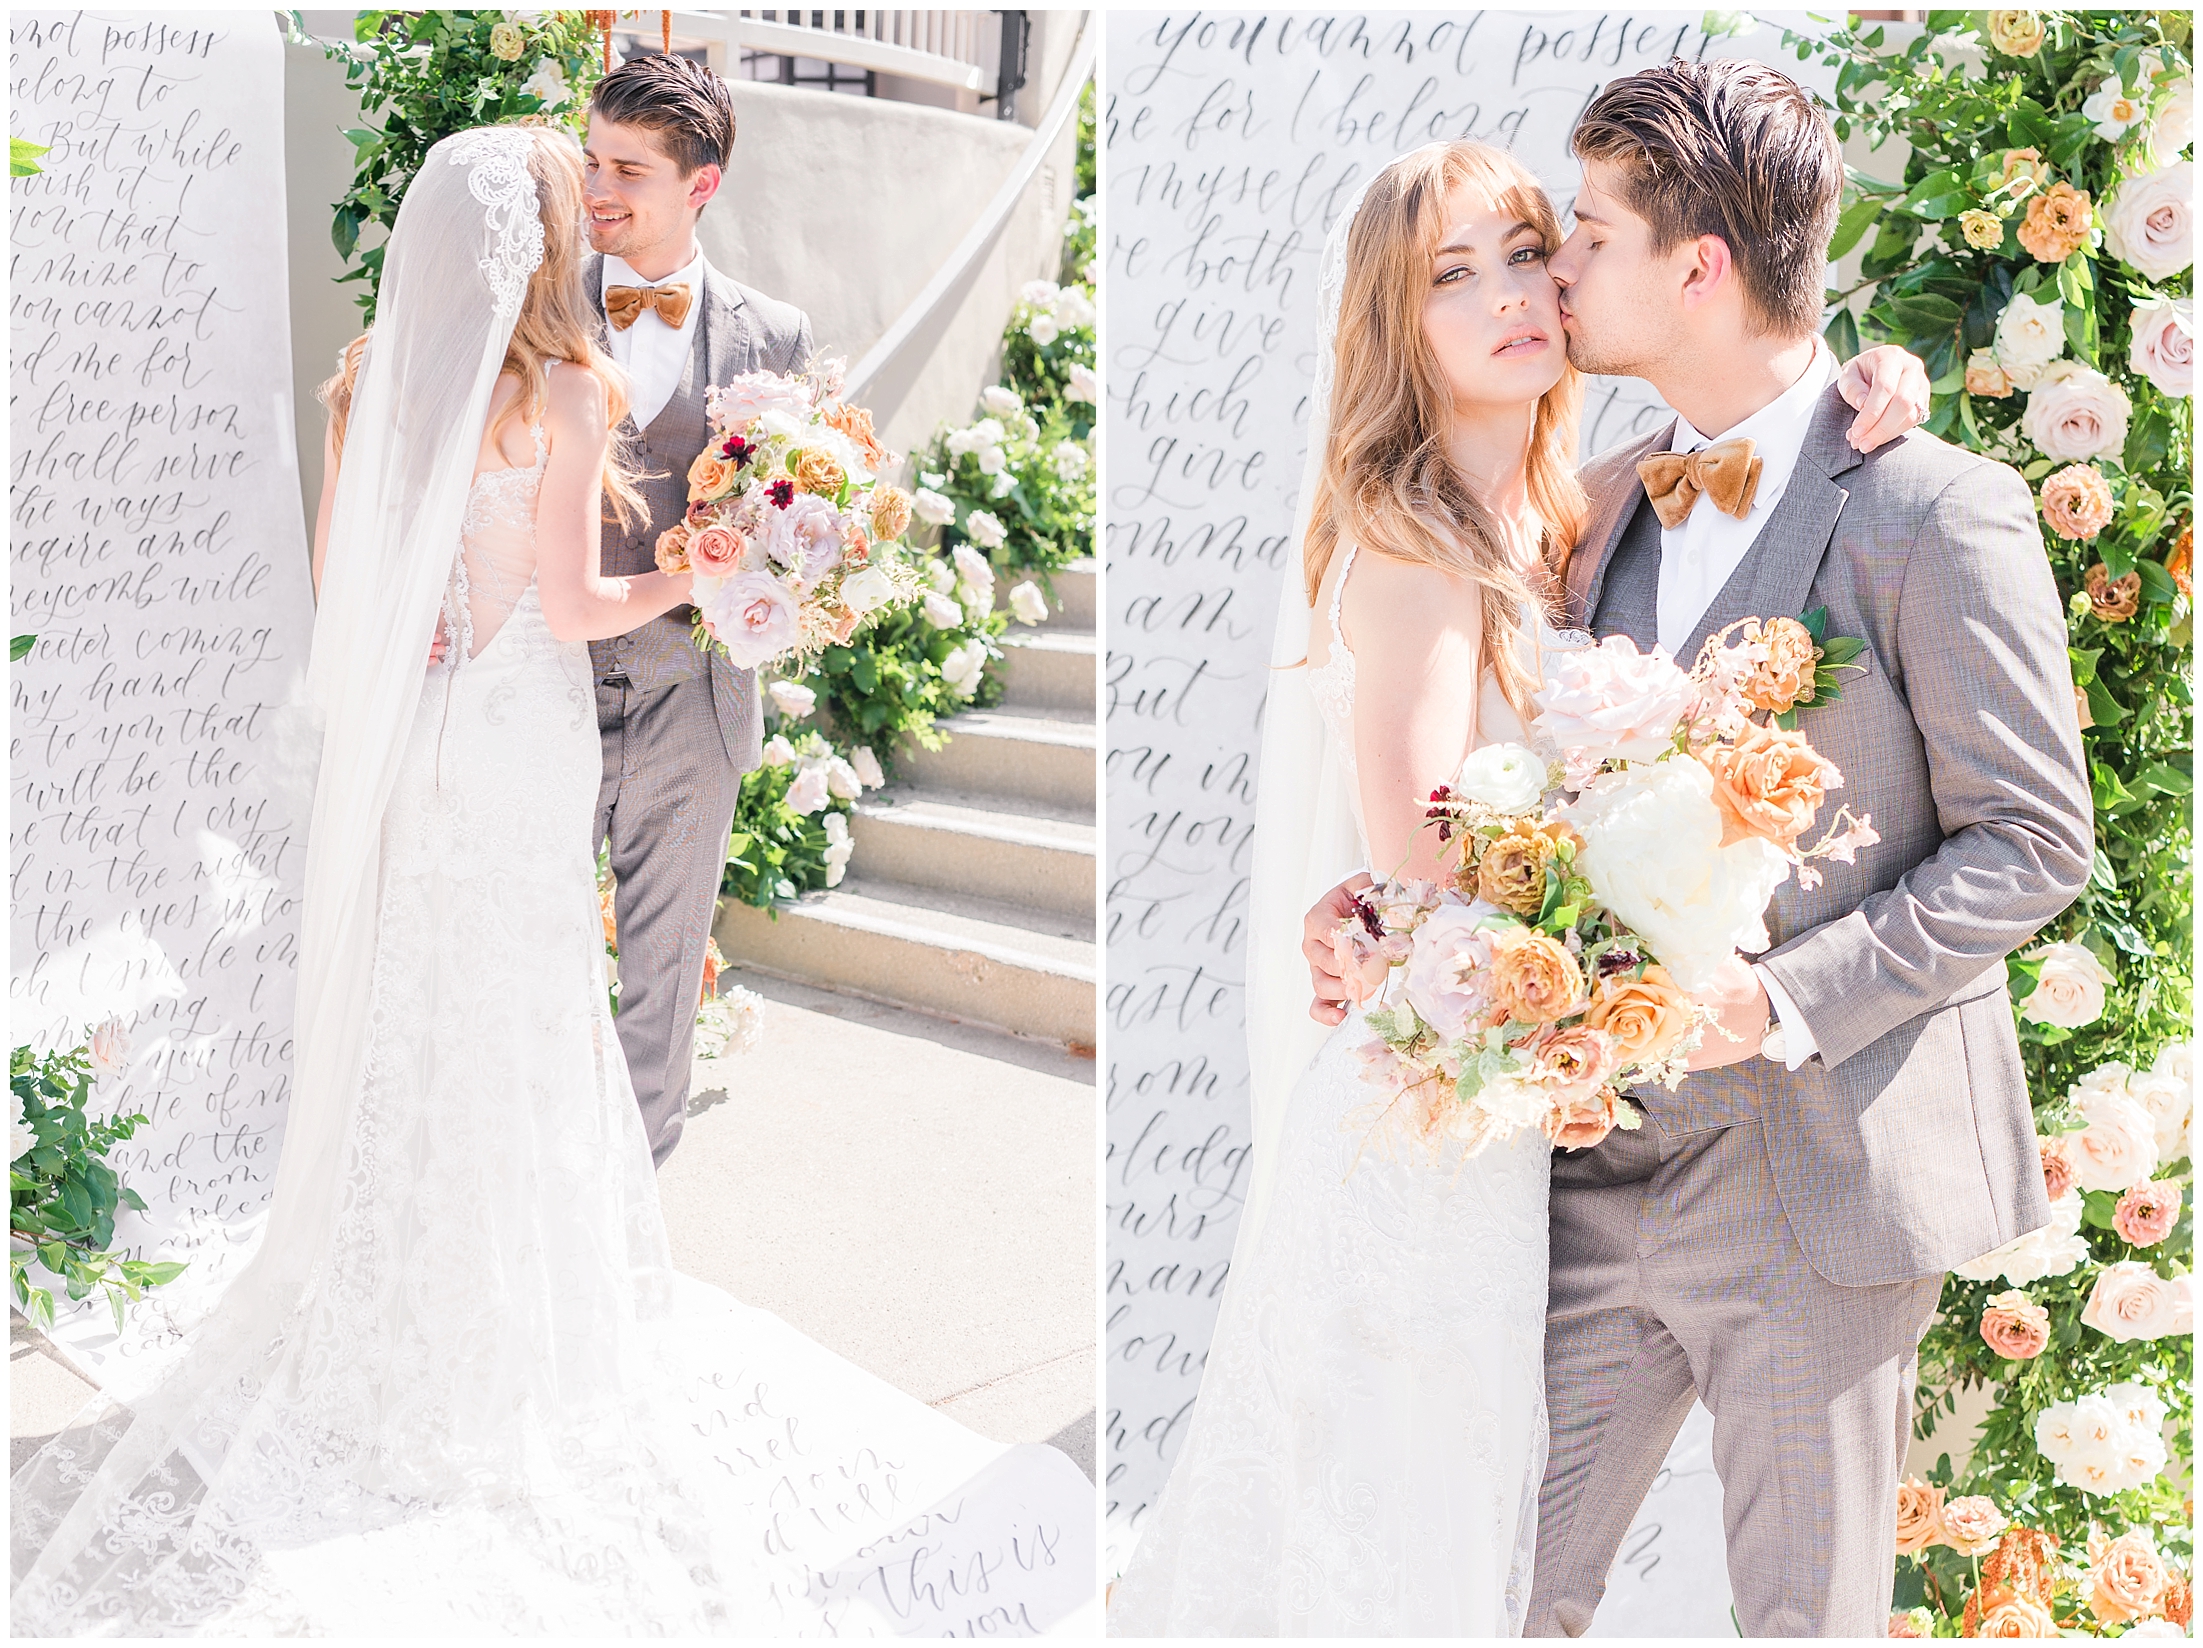 Light and Airy Wedding at Marbella Country Club In Orange County, California